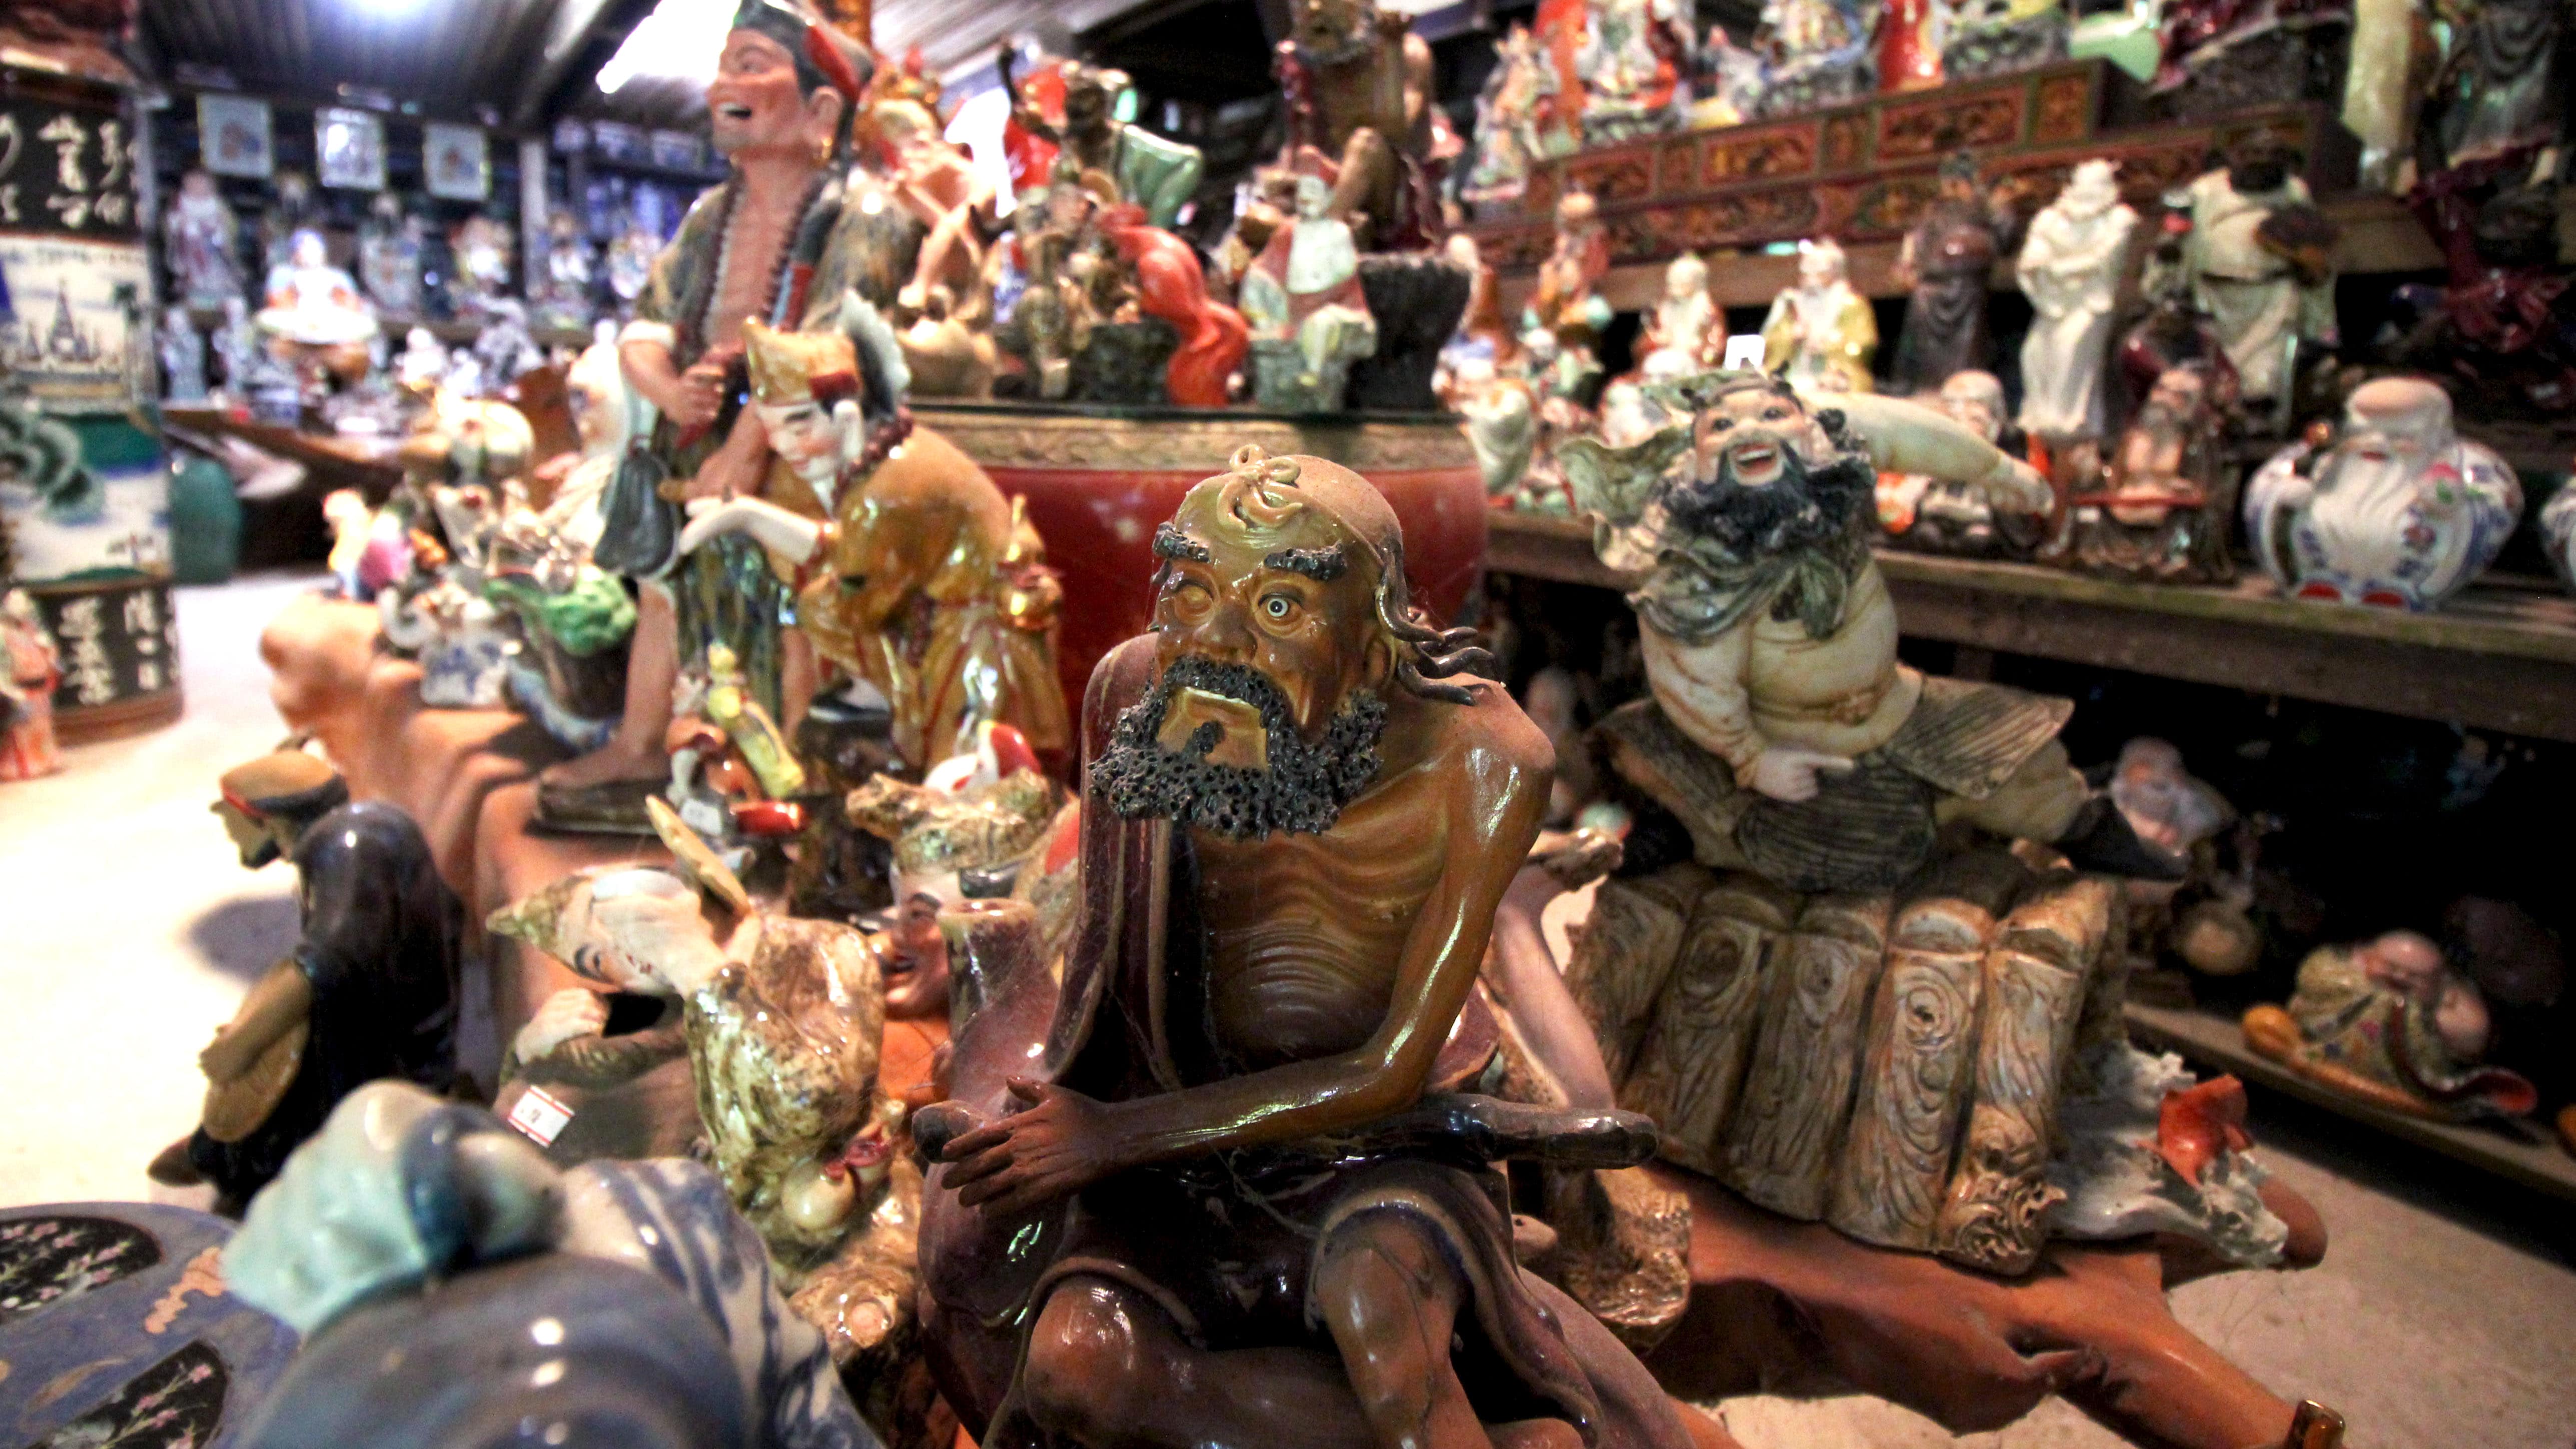 Besides dinnerware like bowls, plates and teapots, Thow Kwang also sells intricately-crafted figurines of Chinese deities and other characters from history and folklore. Photo by Lin Yanqin	